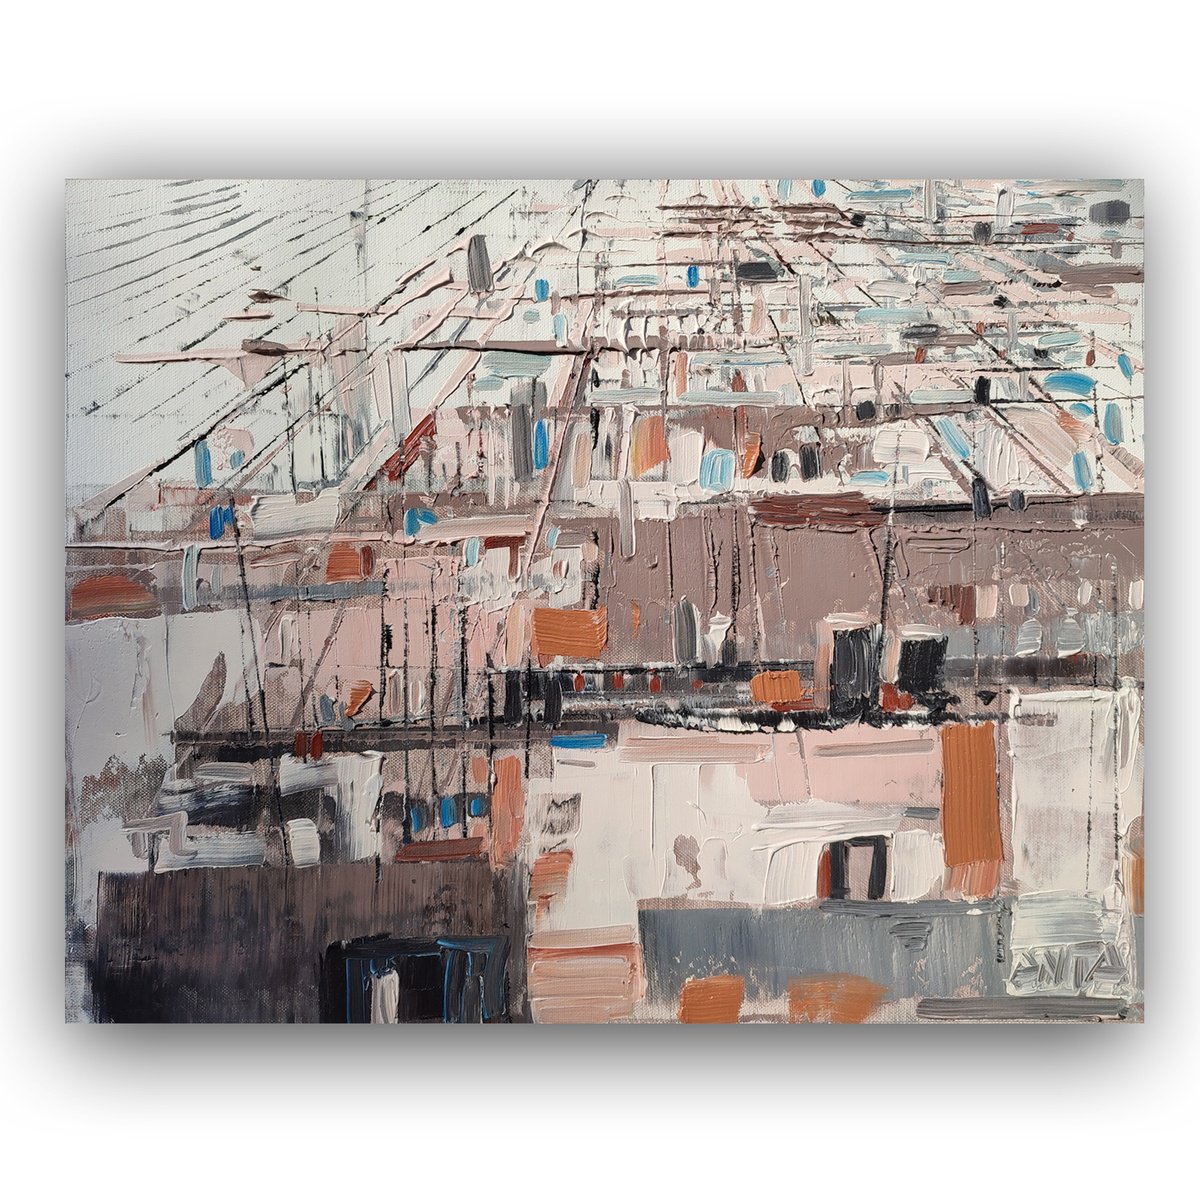 Abstract oil painting City lines 8. Size 15,7/19,7 inches, 40/50cm, stretched by Kariko ono